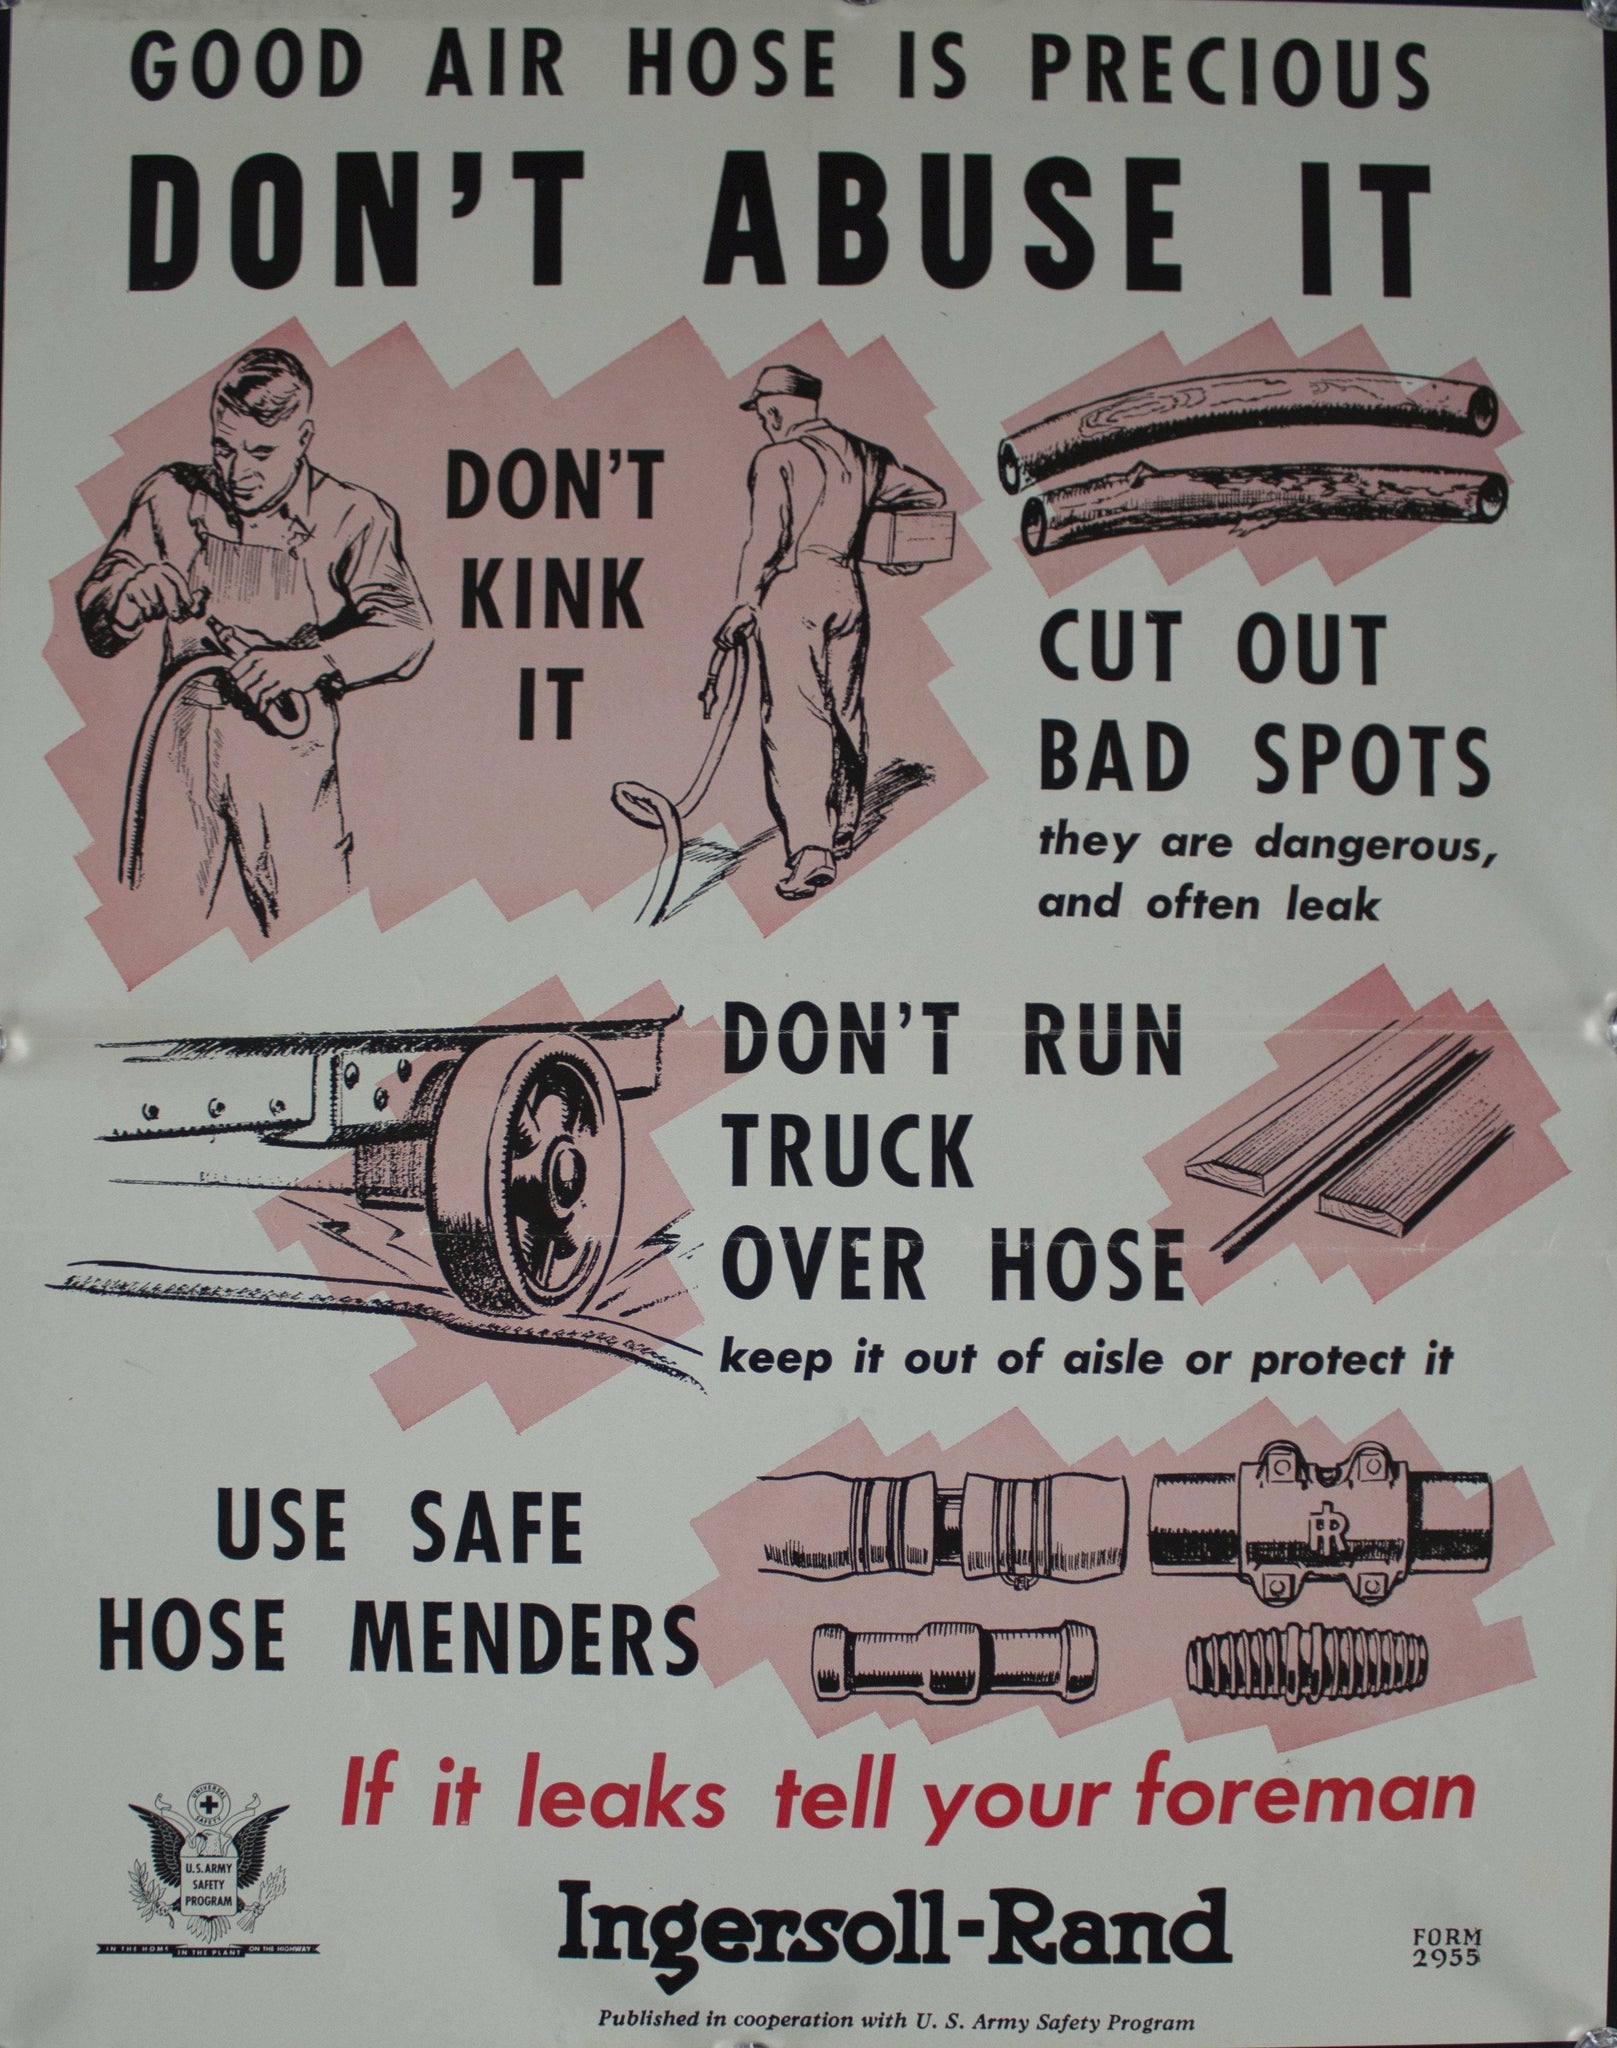 c. 1942 Good Air Hose is Precious - Don't Abuse It - Ingersoll-Rand - Golden Age Posters